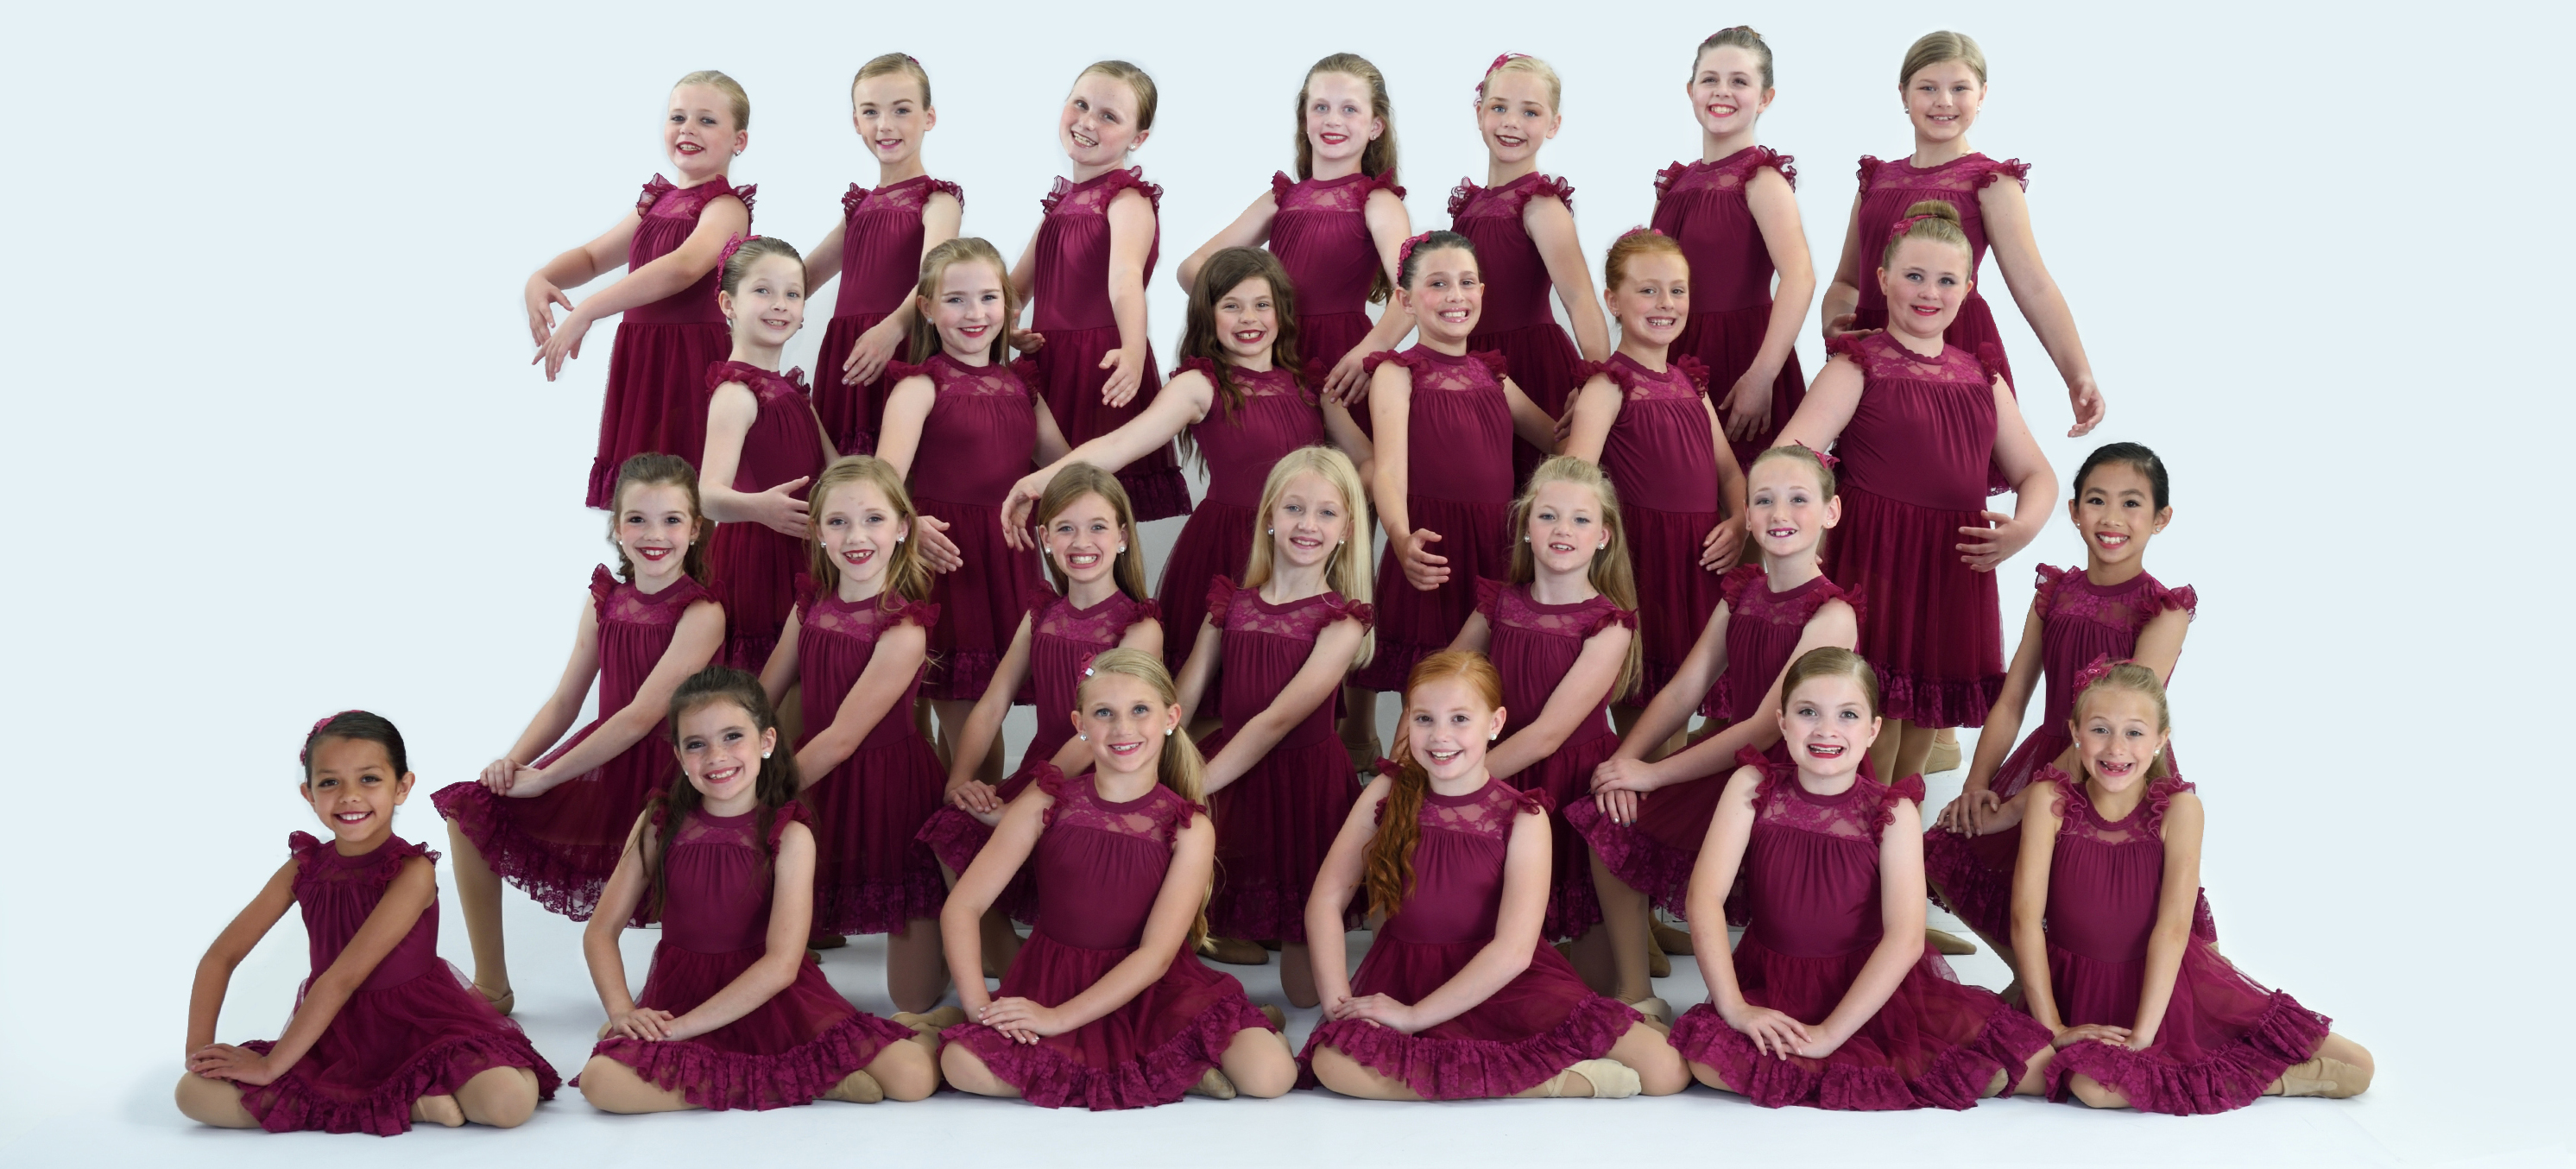 Brekke Dance Center students in another group photo